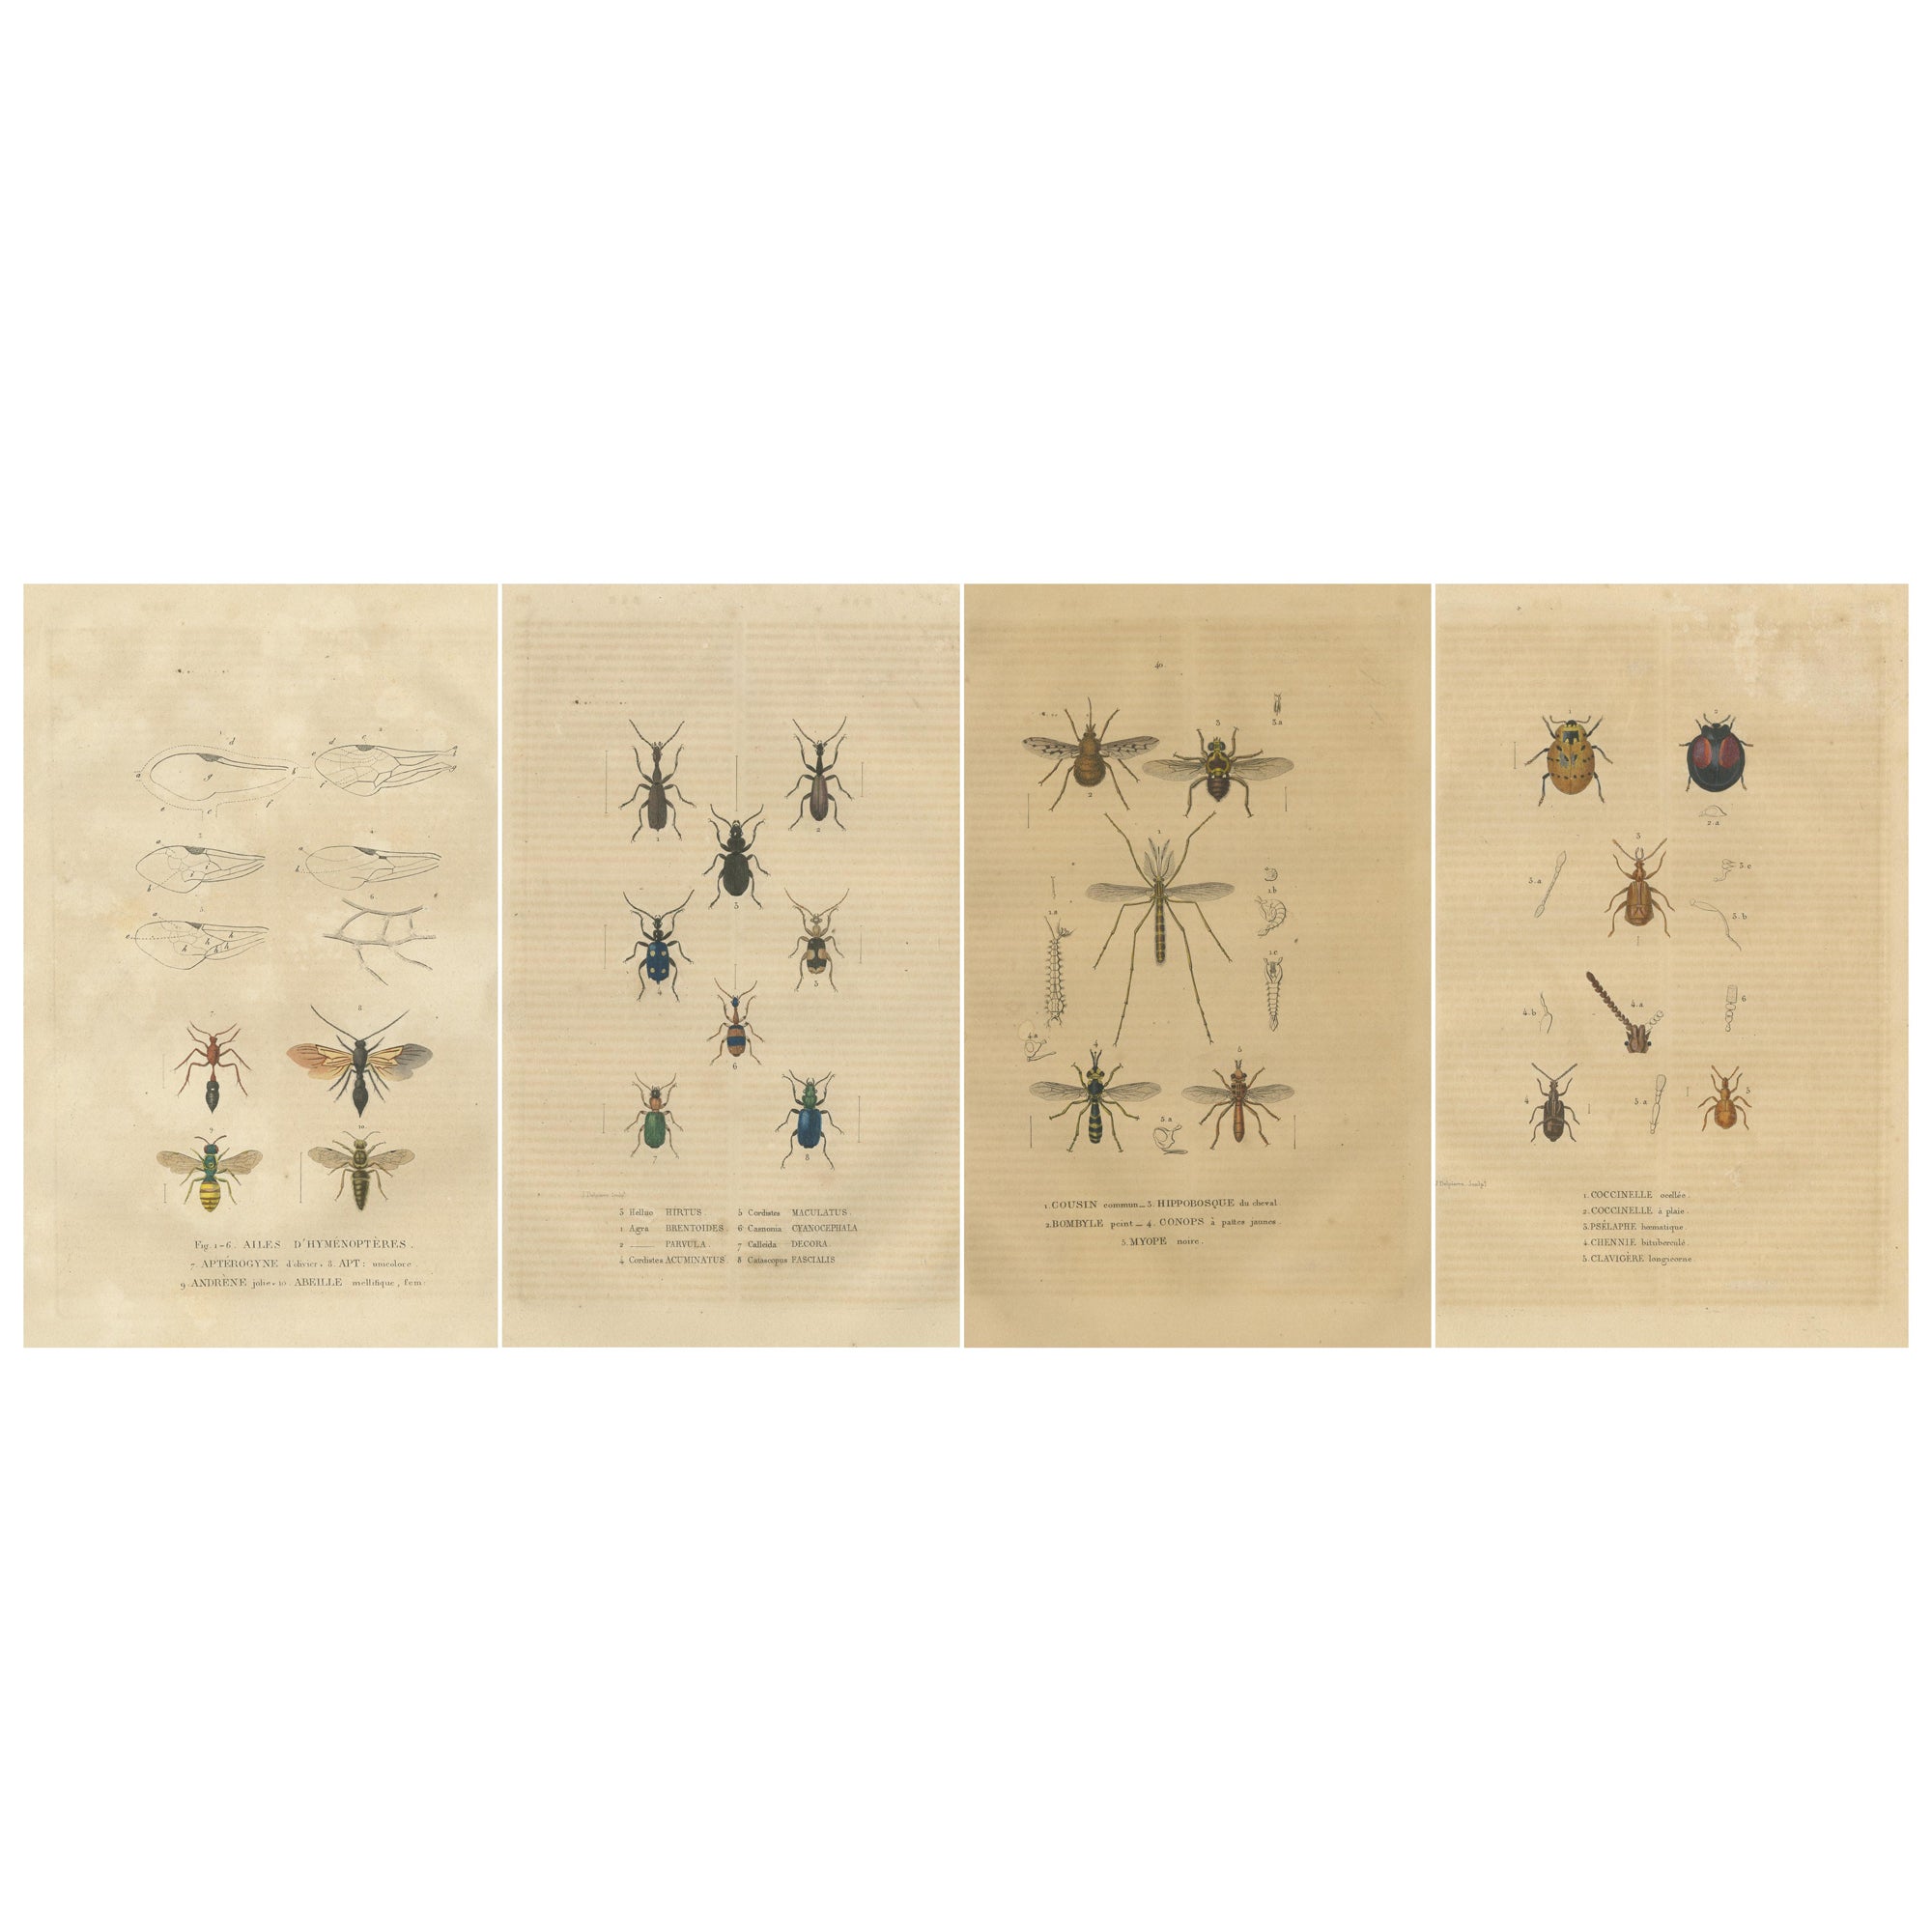 1845 Entomological Treasury: A Detailed Study of Insect Diversity